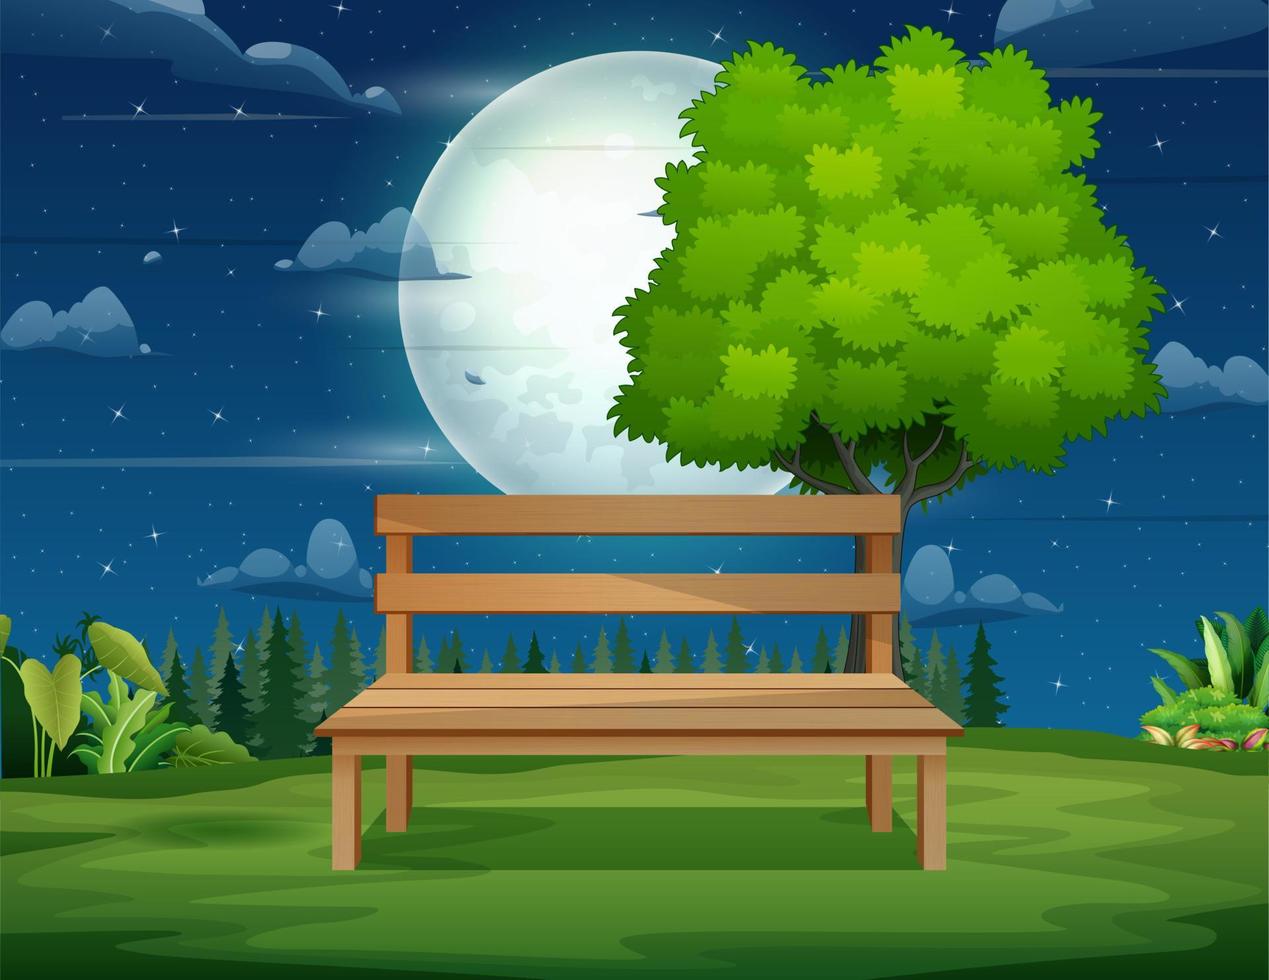 A wooden bench and tree in the night landscape vector